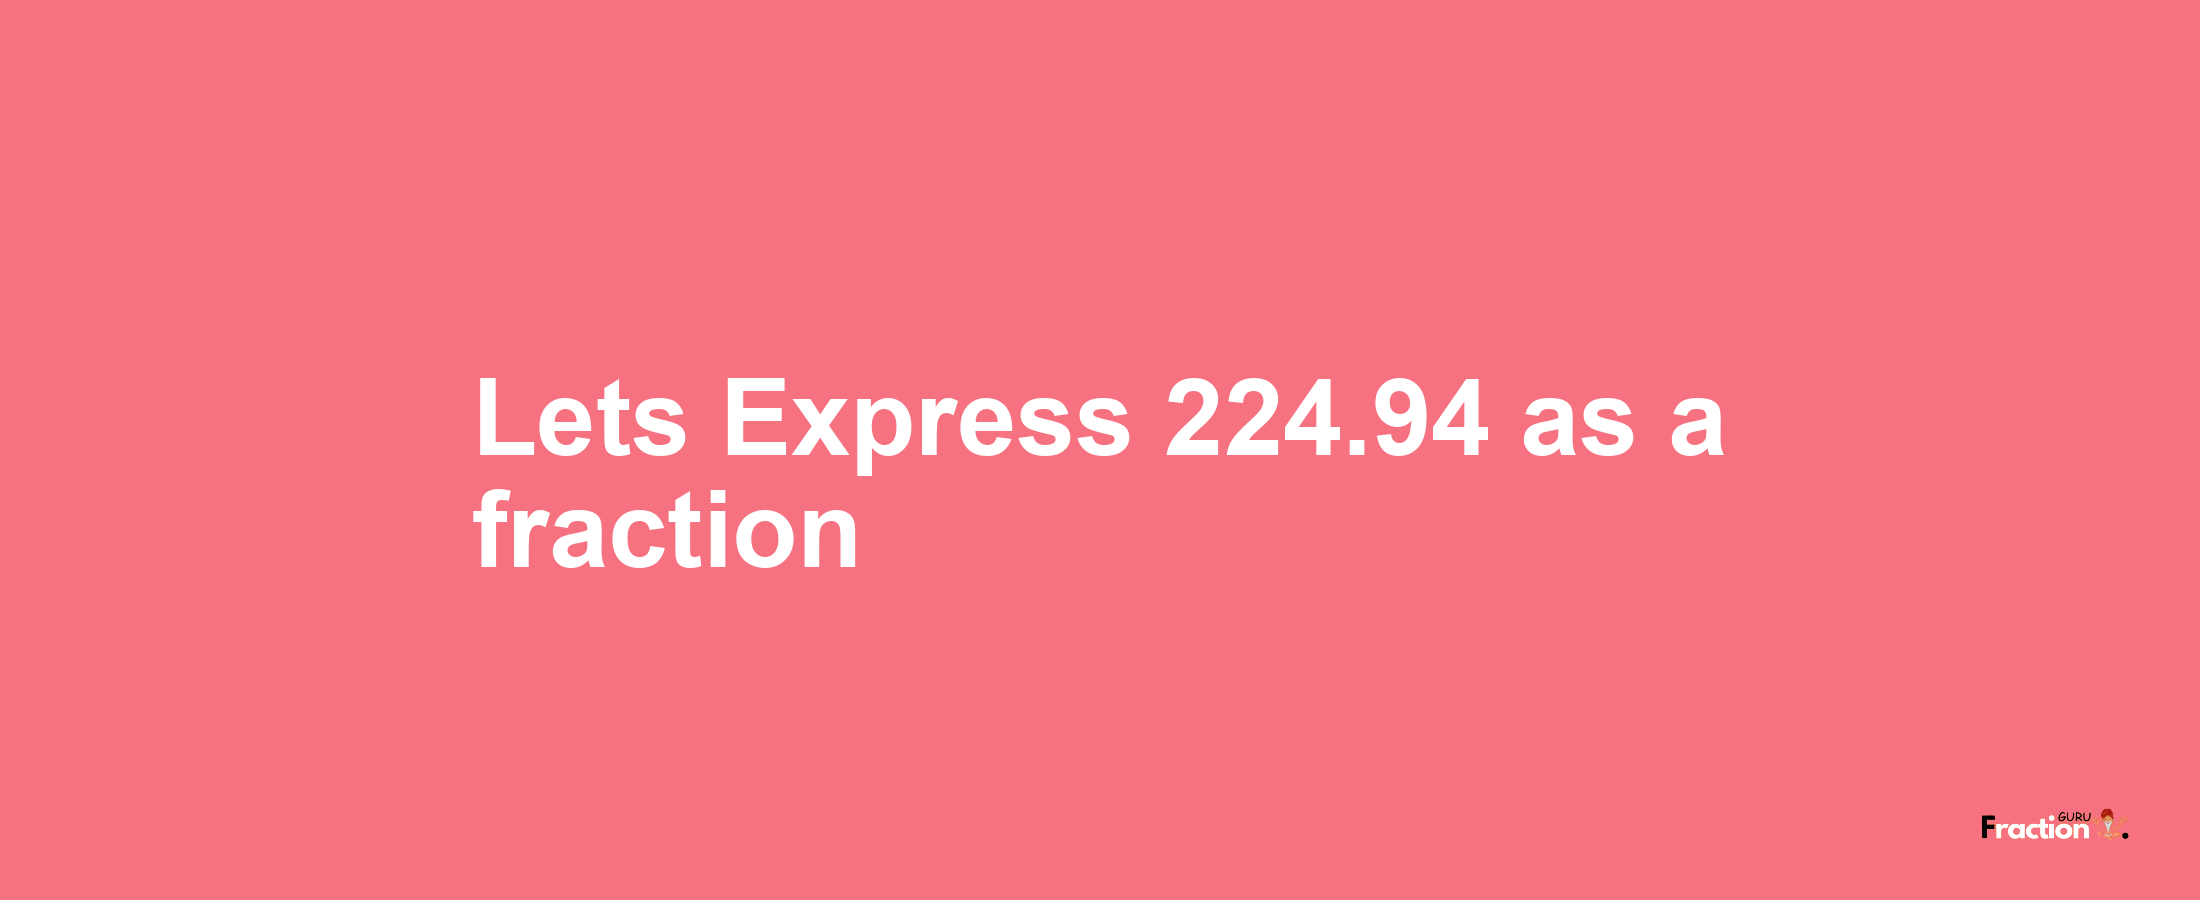 Lets Express 224.94 as afraction